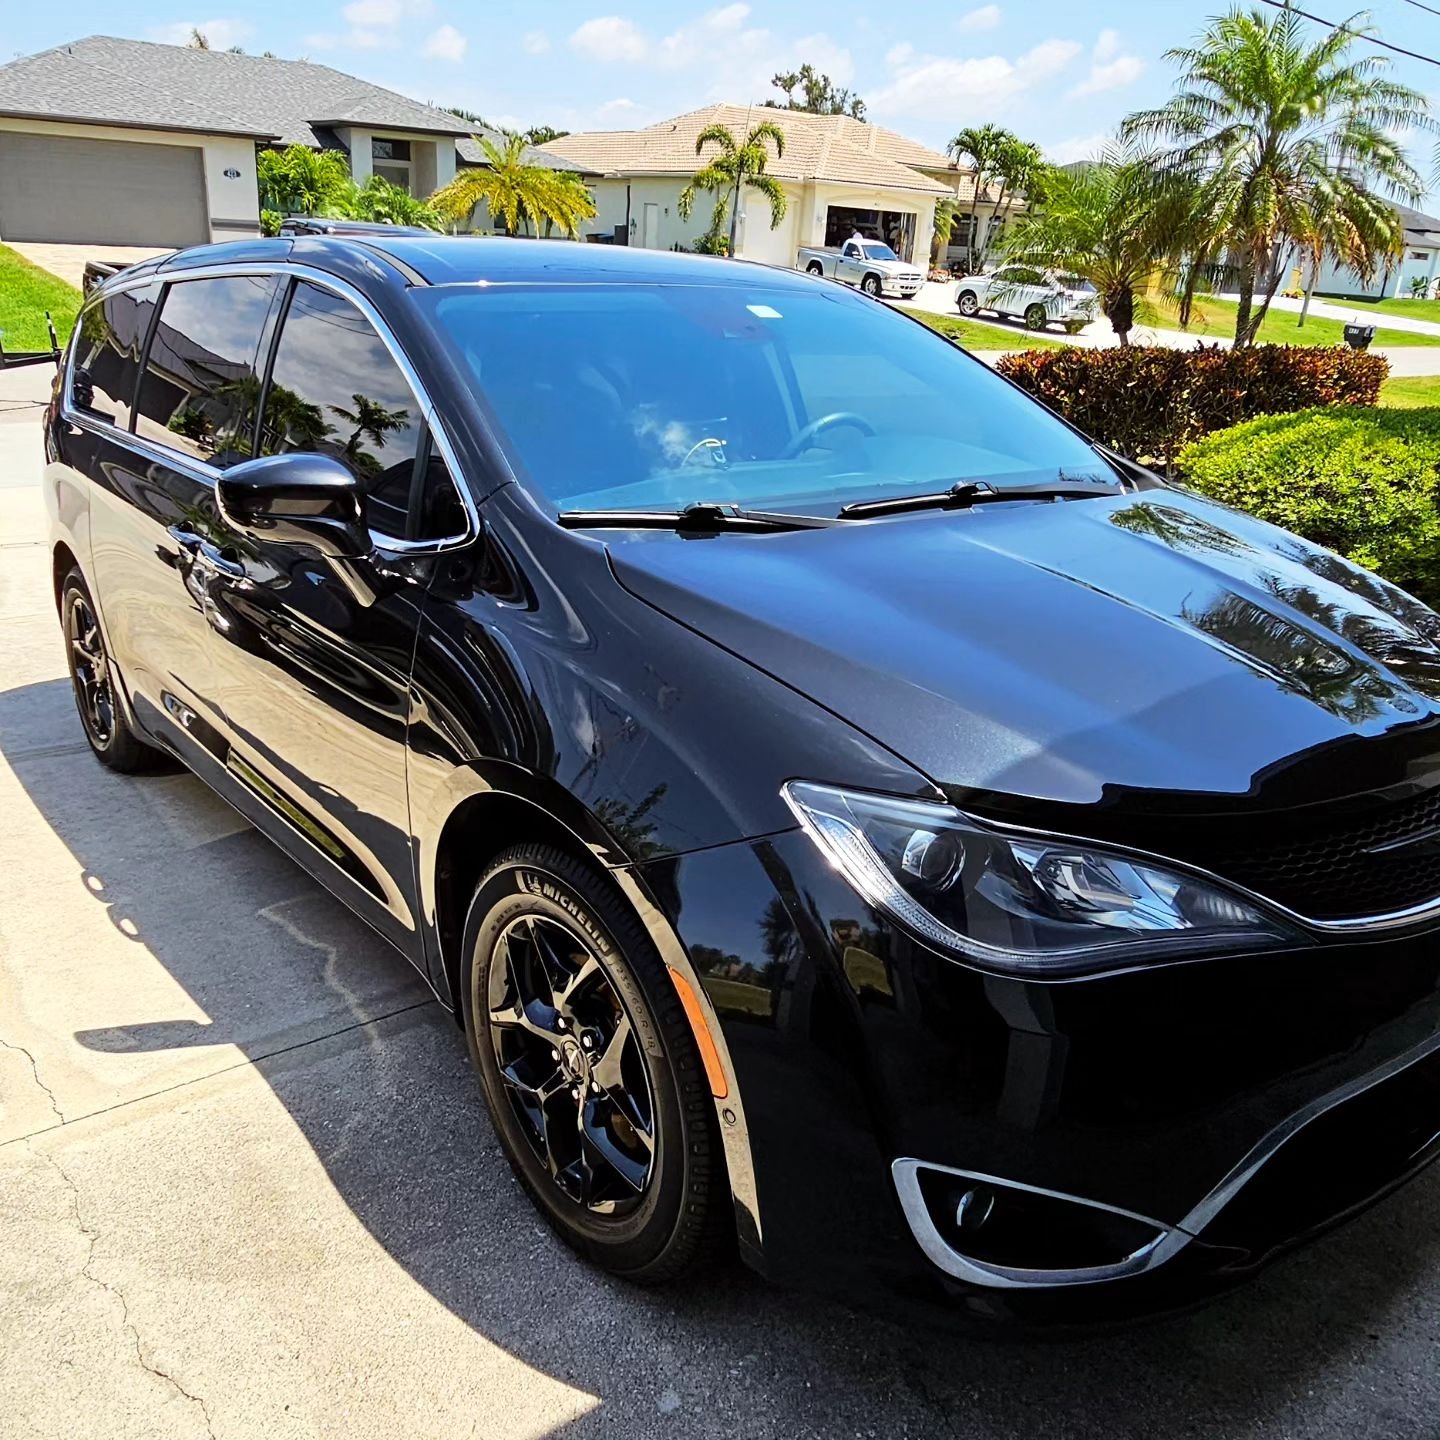 We refreshed this Chrysler minivan with our Standard Detail Package, including both interior and exterior care. Choose from our range of packages tailored to suit your needs, whether it's interior, exterior, or both. Improve your driving experience w